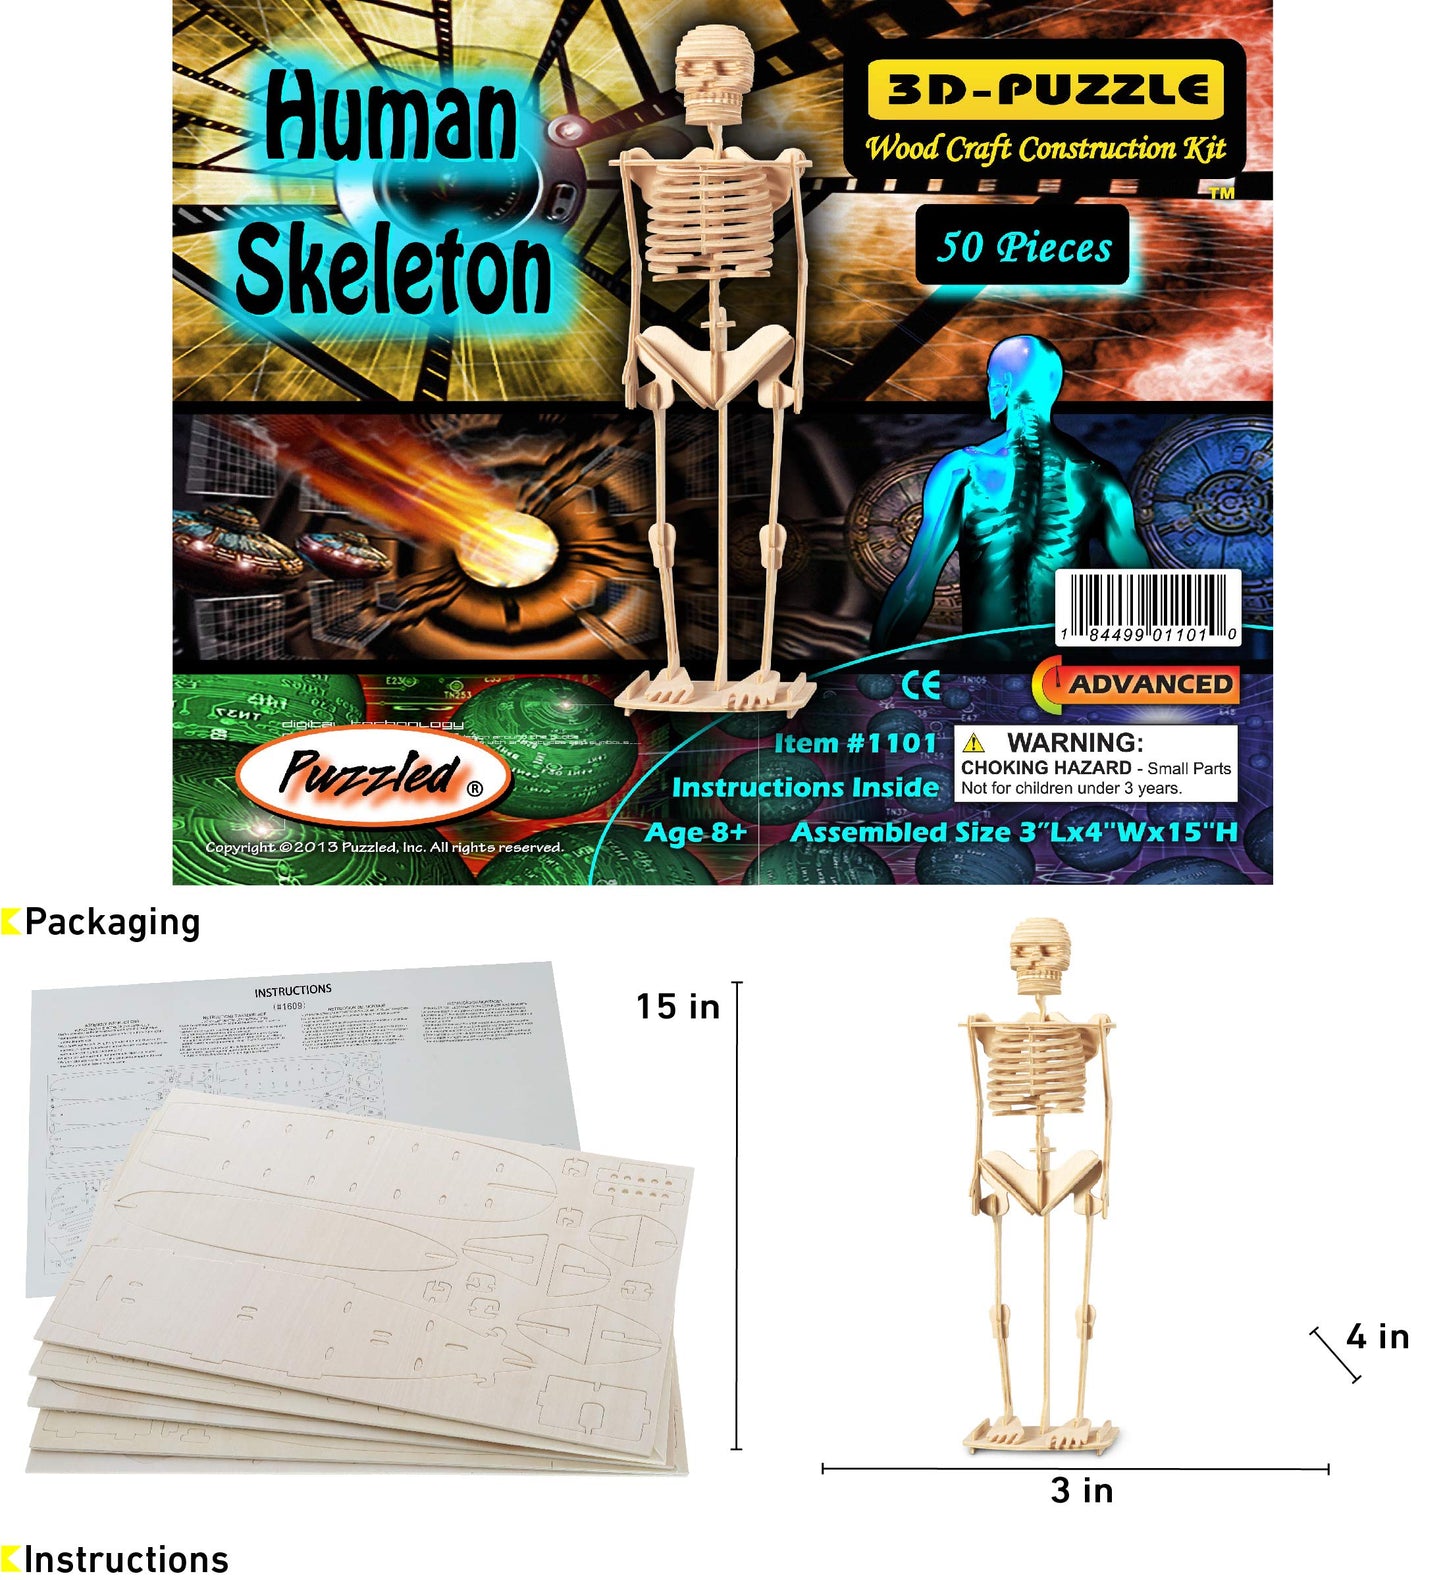 Puzzled 3D Puzzle Human Skeleton Wood Craft Construction Model Kit, Fun & Educational DIY Wooden Toy Assemble Model Unfinished Crafting Hobby Puzzle